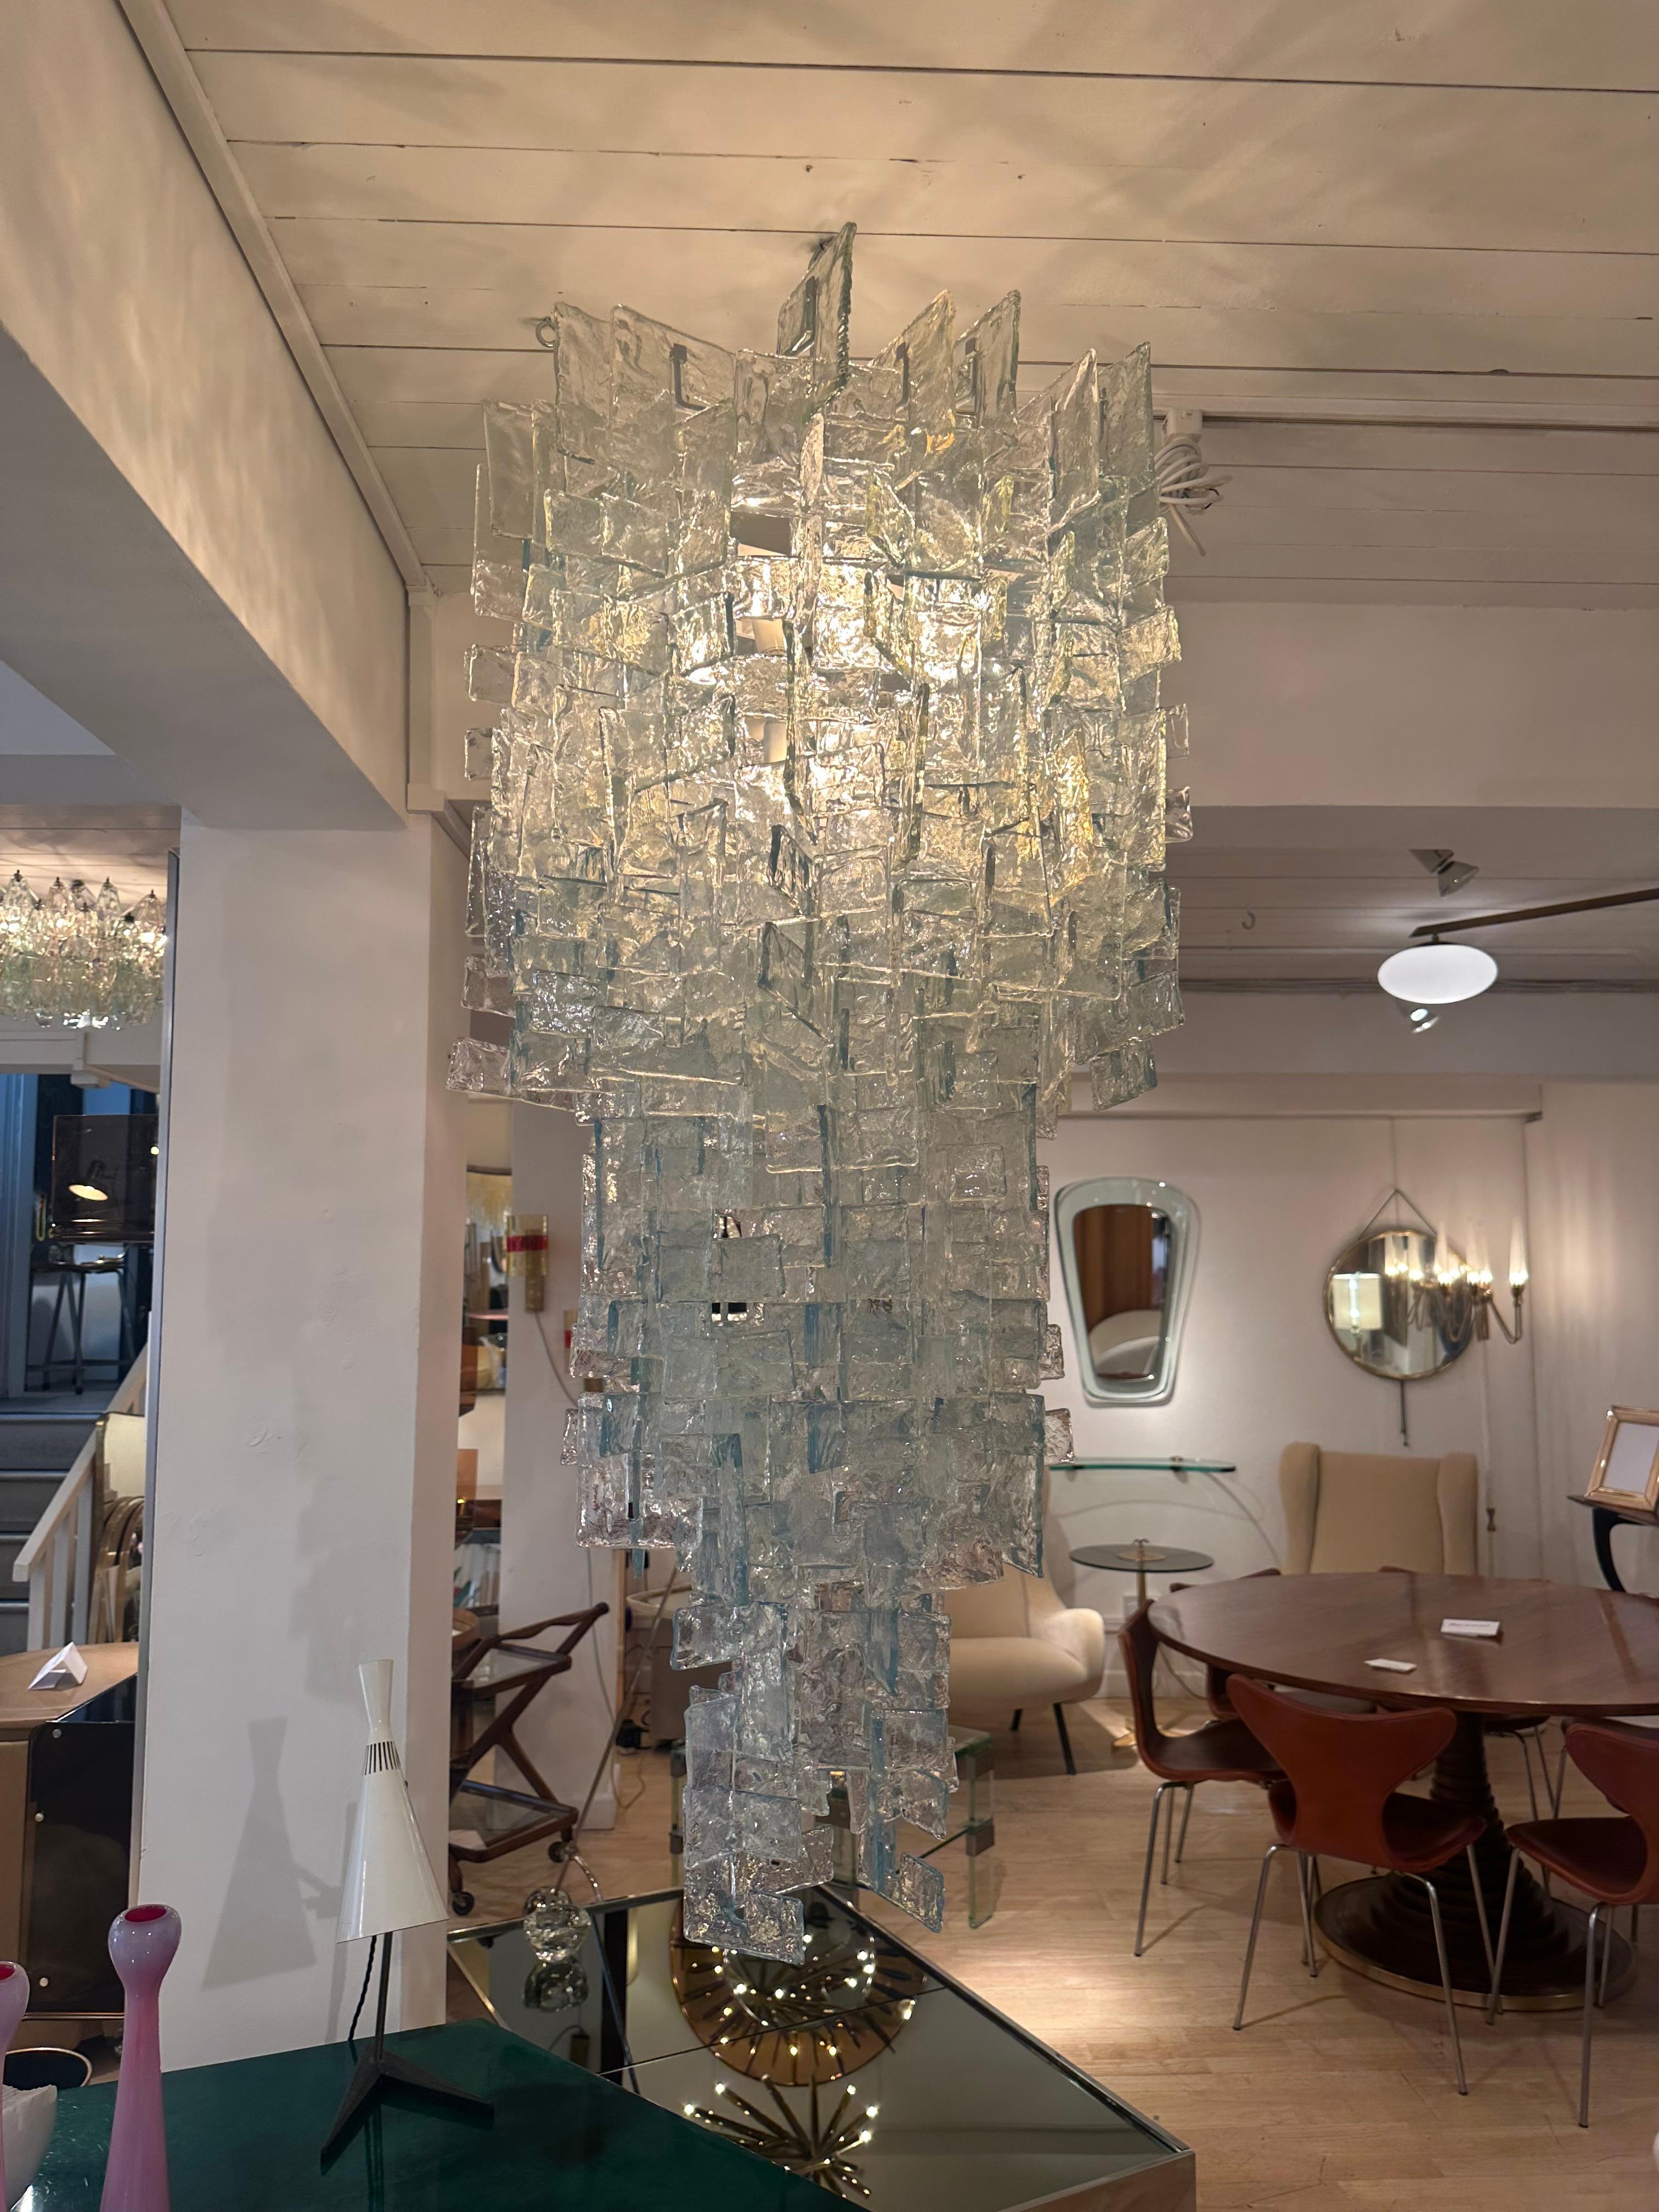 Original Carlo Nason interlocking glass elements for Mazzega c 1970

The drop can be extended. There are around 80 pieces of glass not shown here so the chandelier can be larger than shown.

Original Mazzega labels on some elements

The measurements